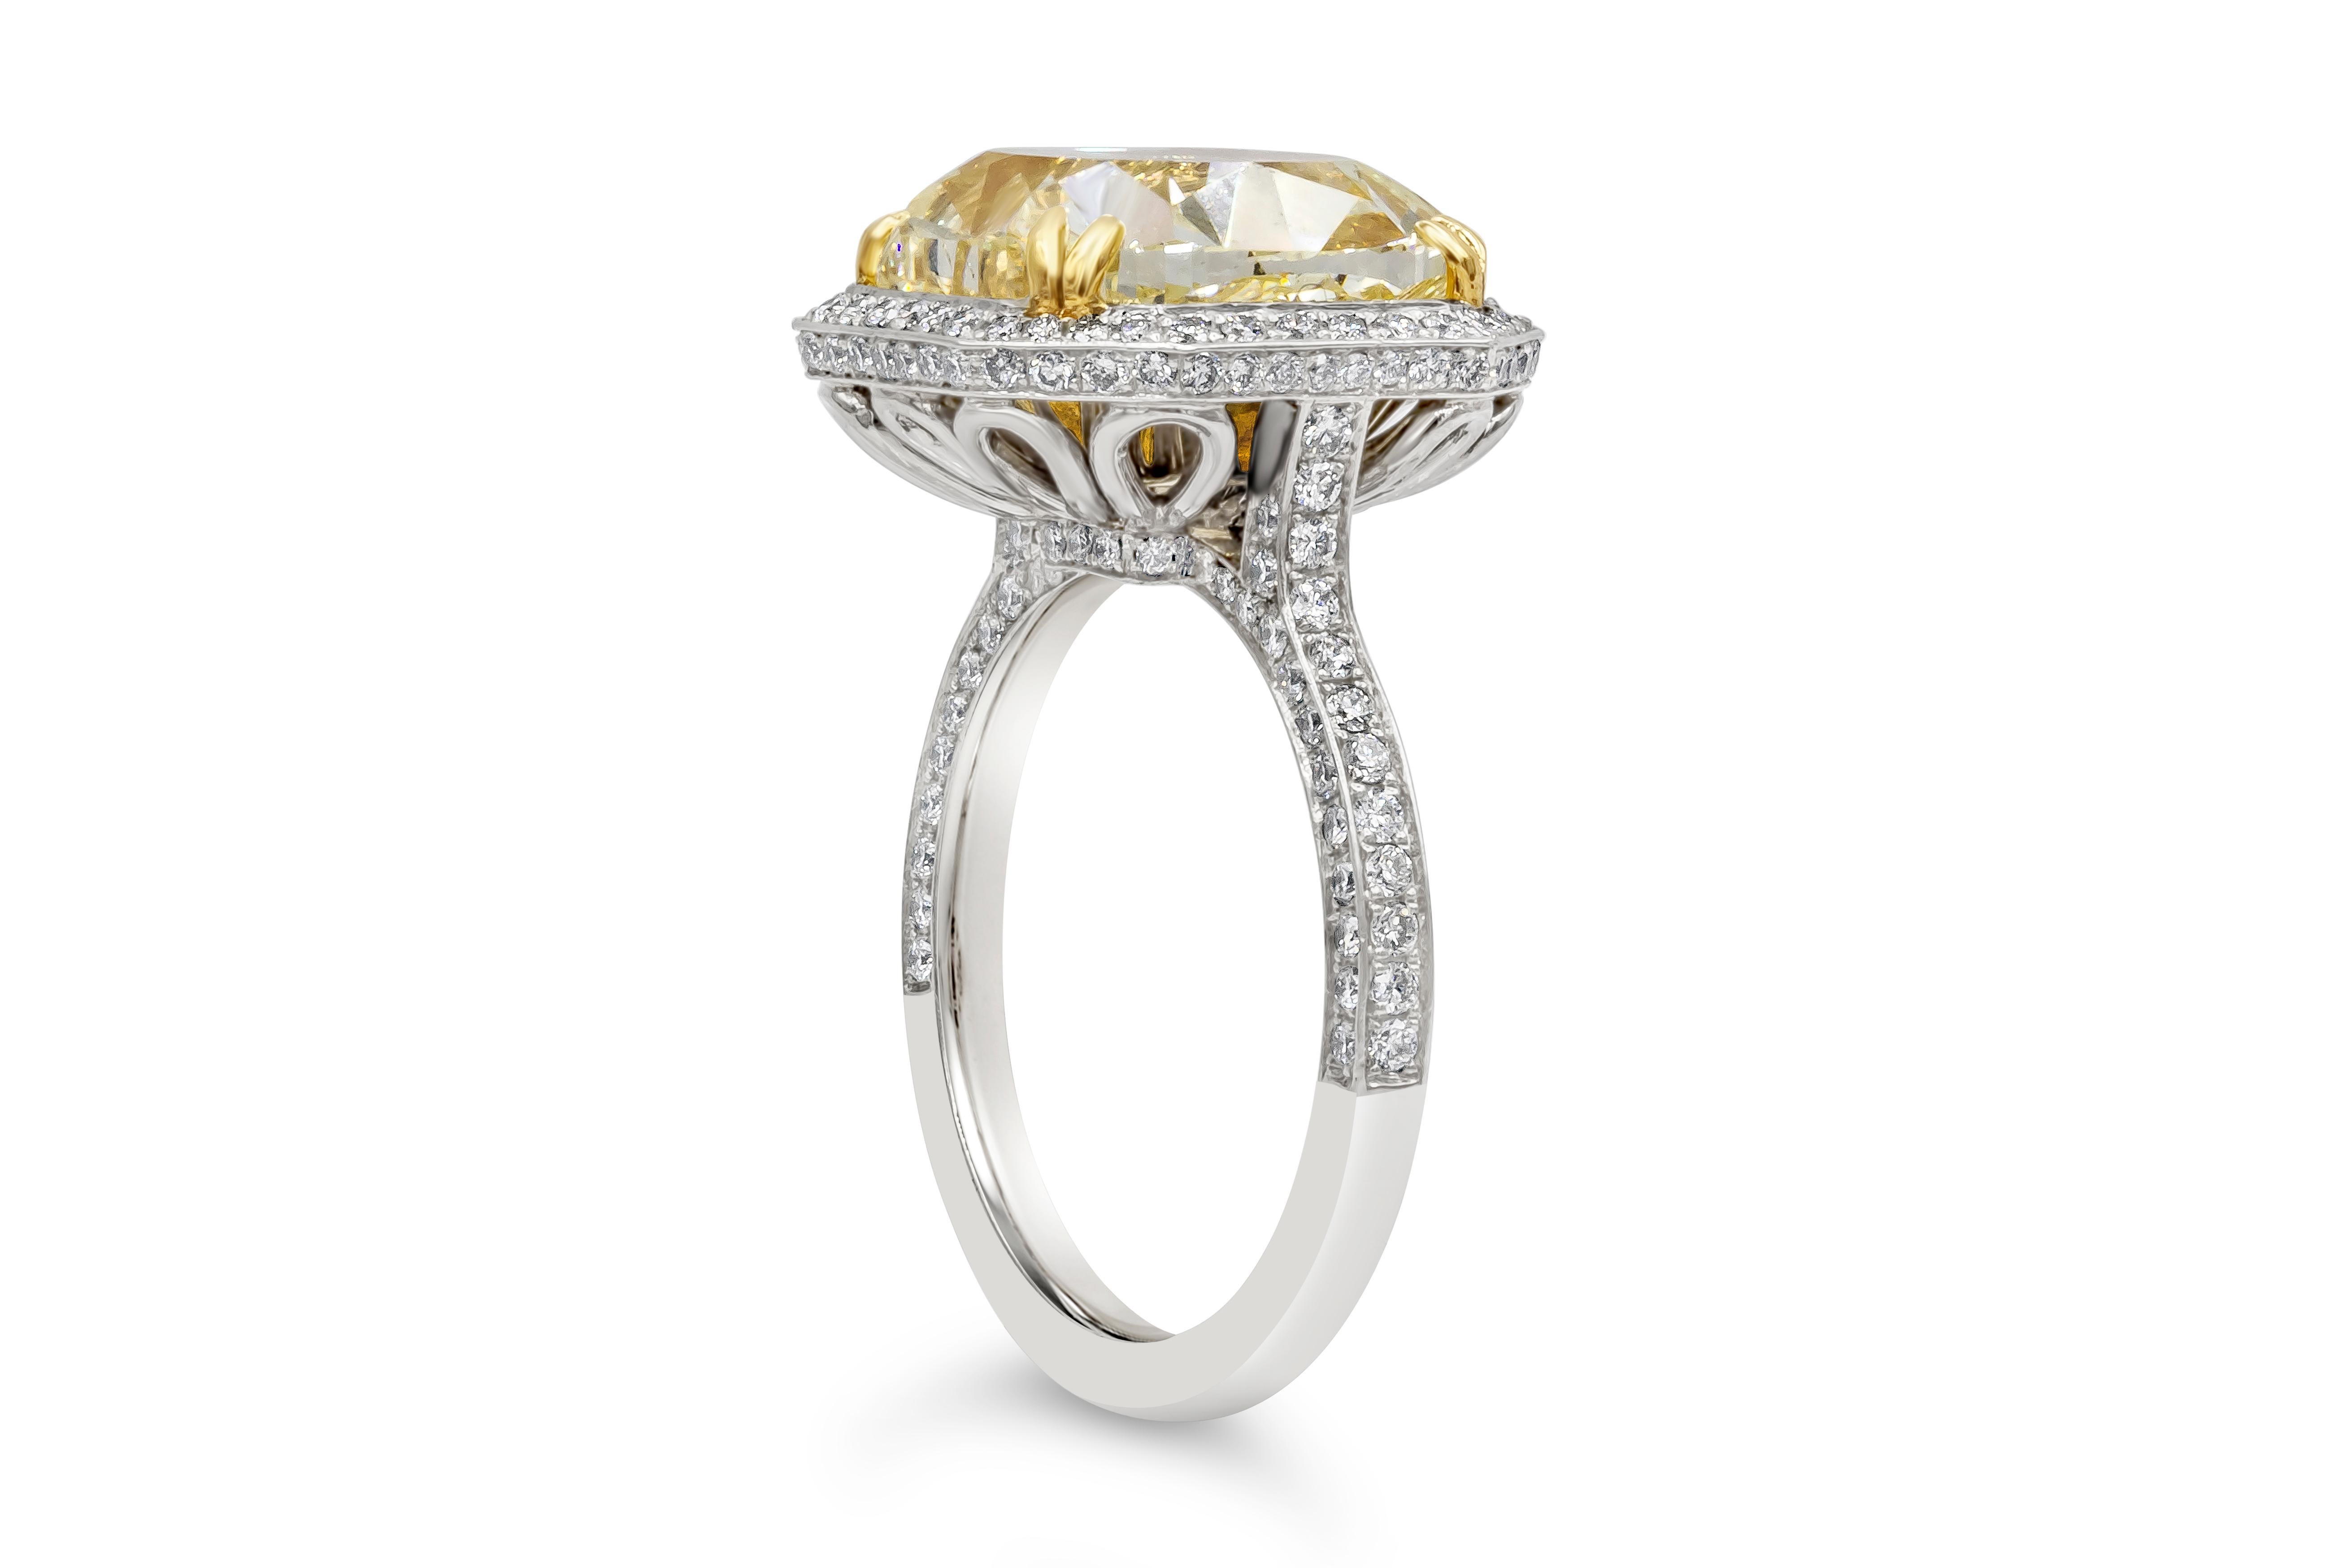 Well crafted color rich halo style engagement ring showcasing a fancy yellow center stone GIA certified 7.64 carat cushion cut, set in an 18k yellow gold eight prong basket. Surrounded by a row of round brilliant diamonds set in a halo design.